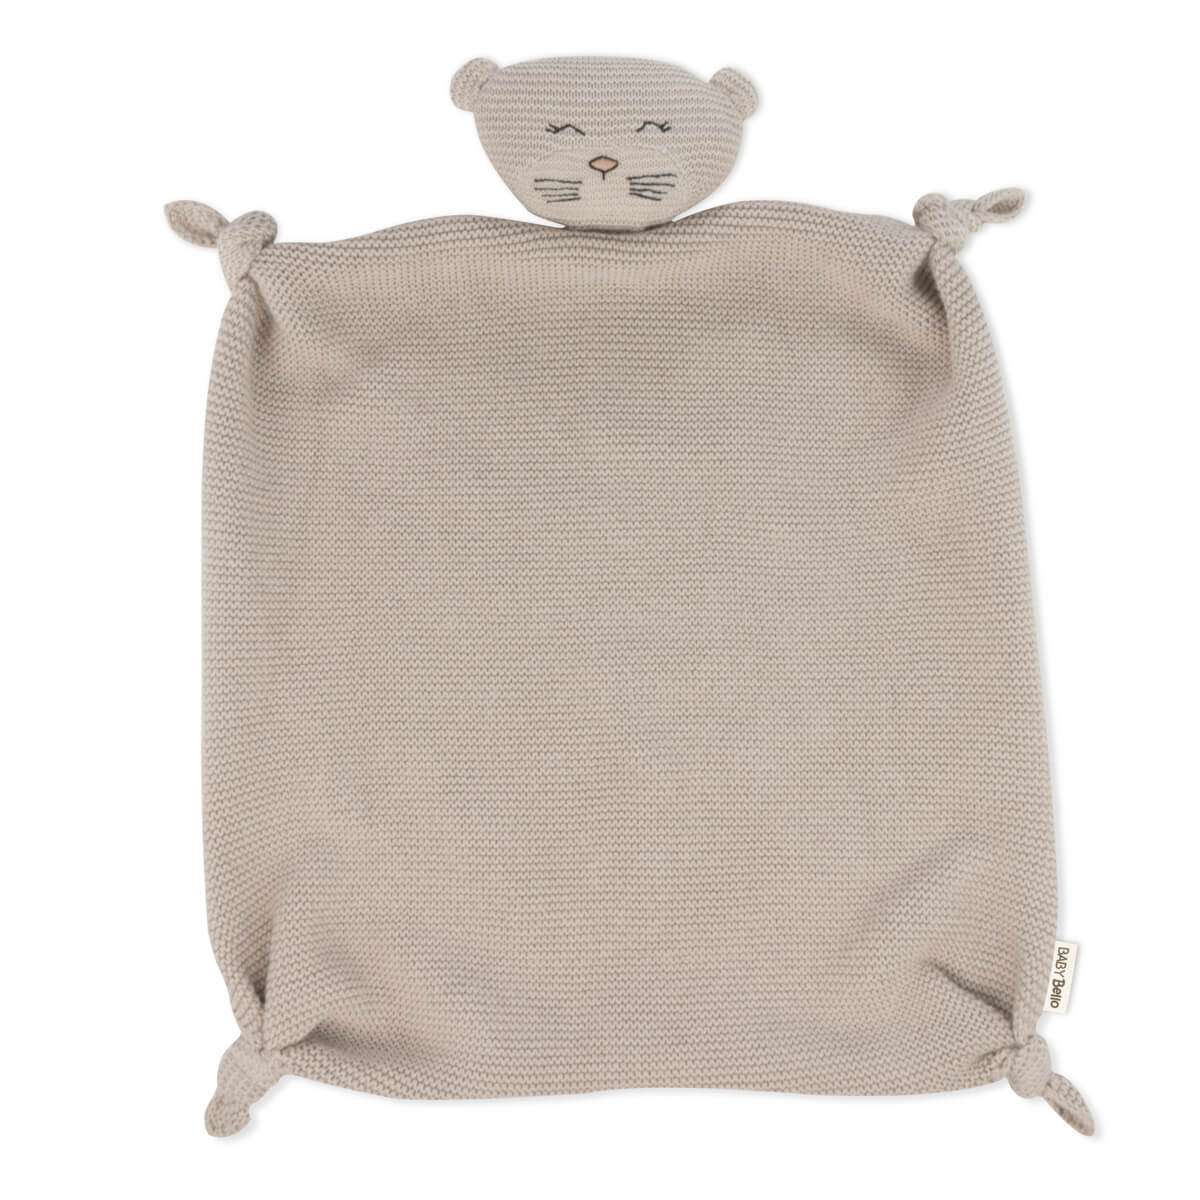 Olly the Otter, Comforter, 100% Organic Cotton